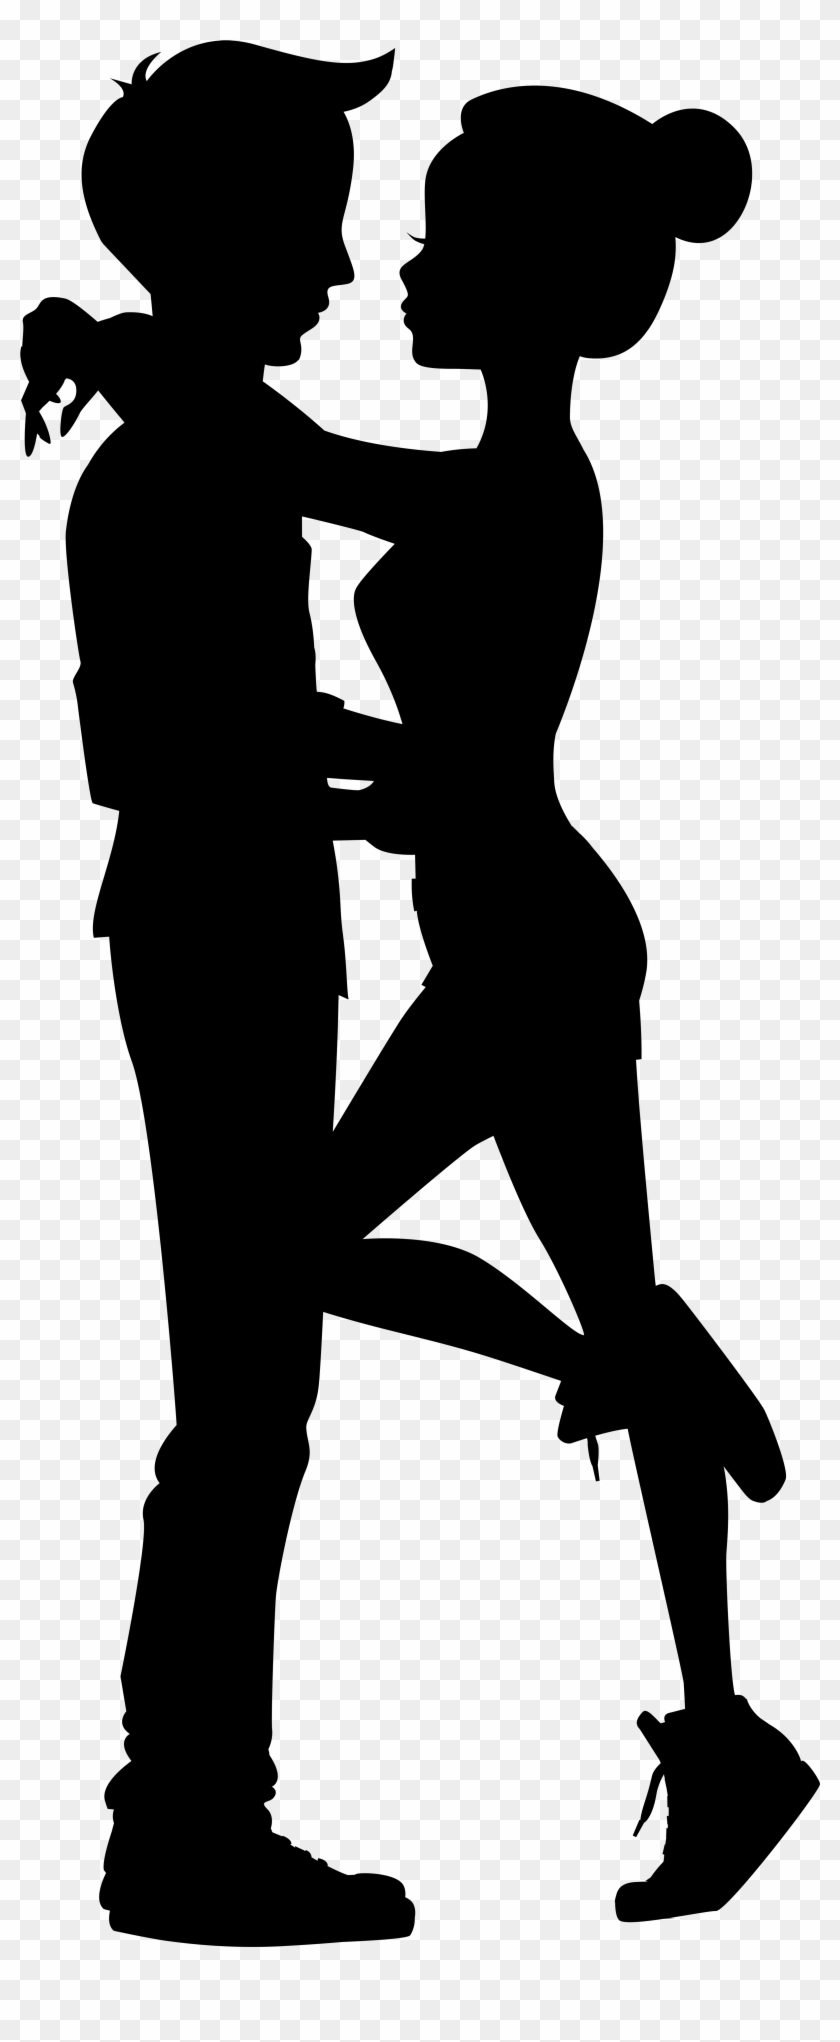 Cute Couple Silhouettes Clip Art Image - Miss You Sweet Dreams #491088